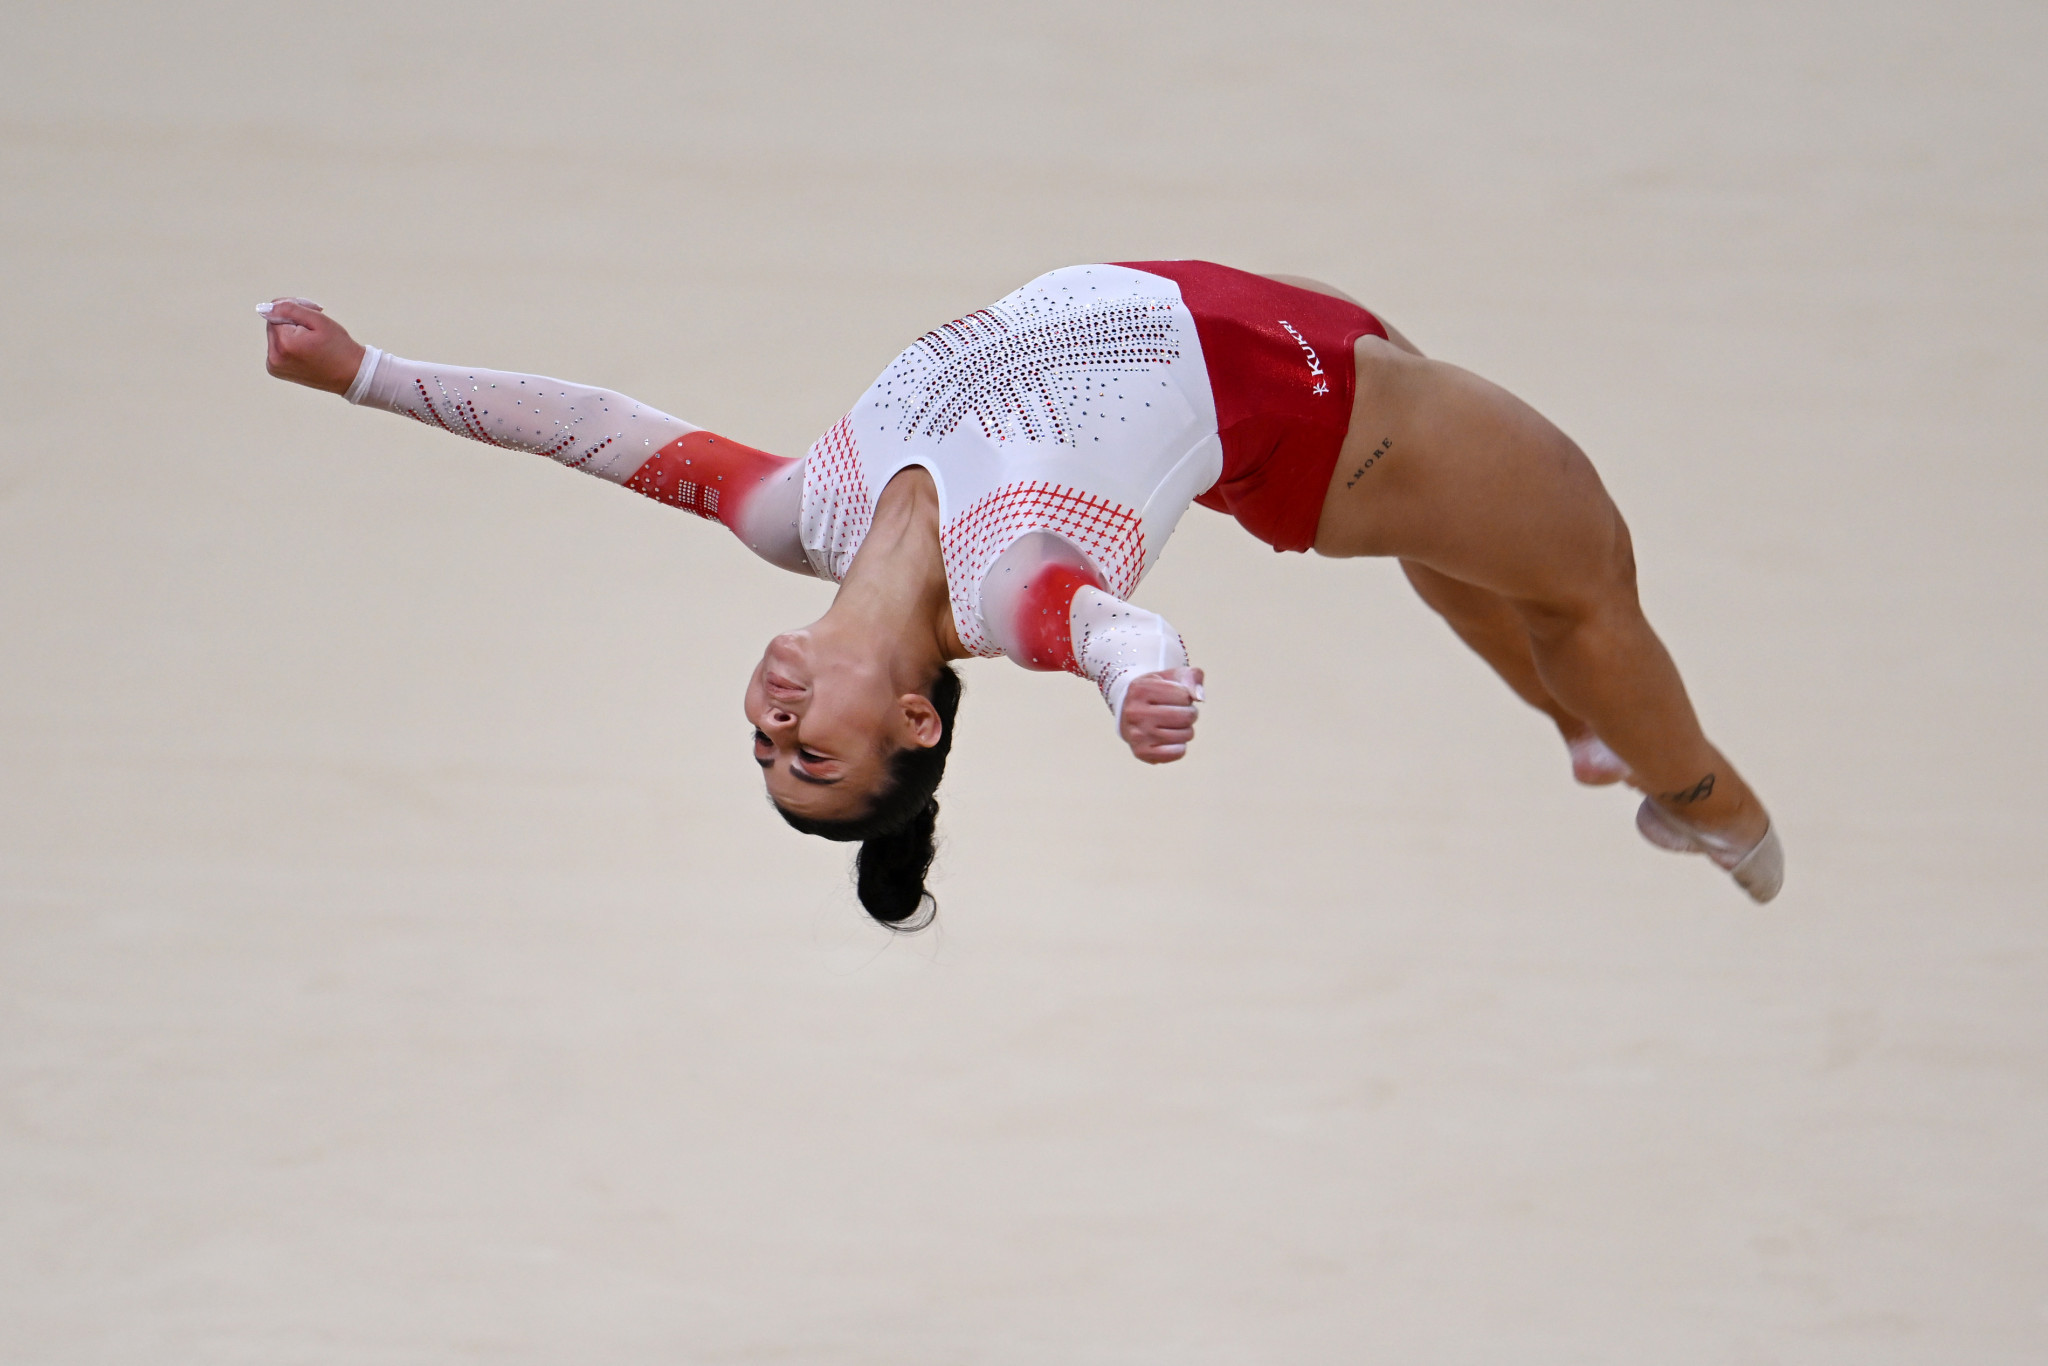 Claudia Fragapane will be among the British gymnasts appearing at the fan zone ©Getty Images